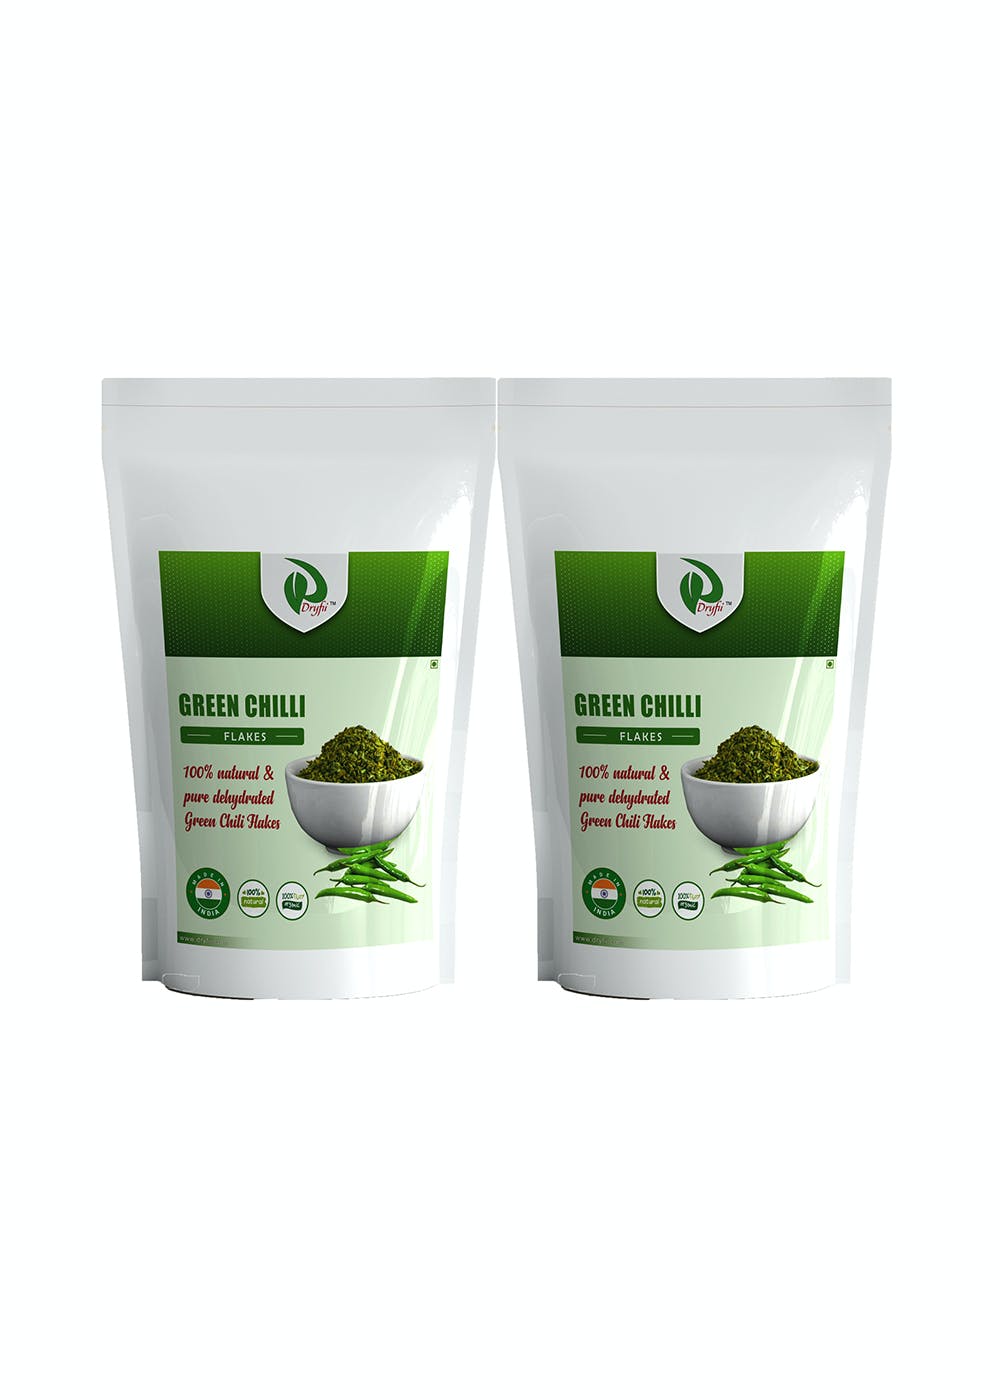 Green Chilli Flakes - Pack of 2 (100gm each)